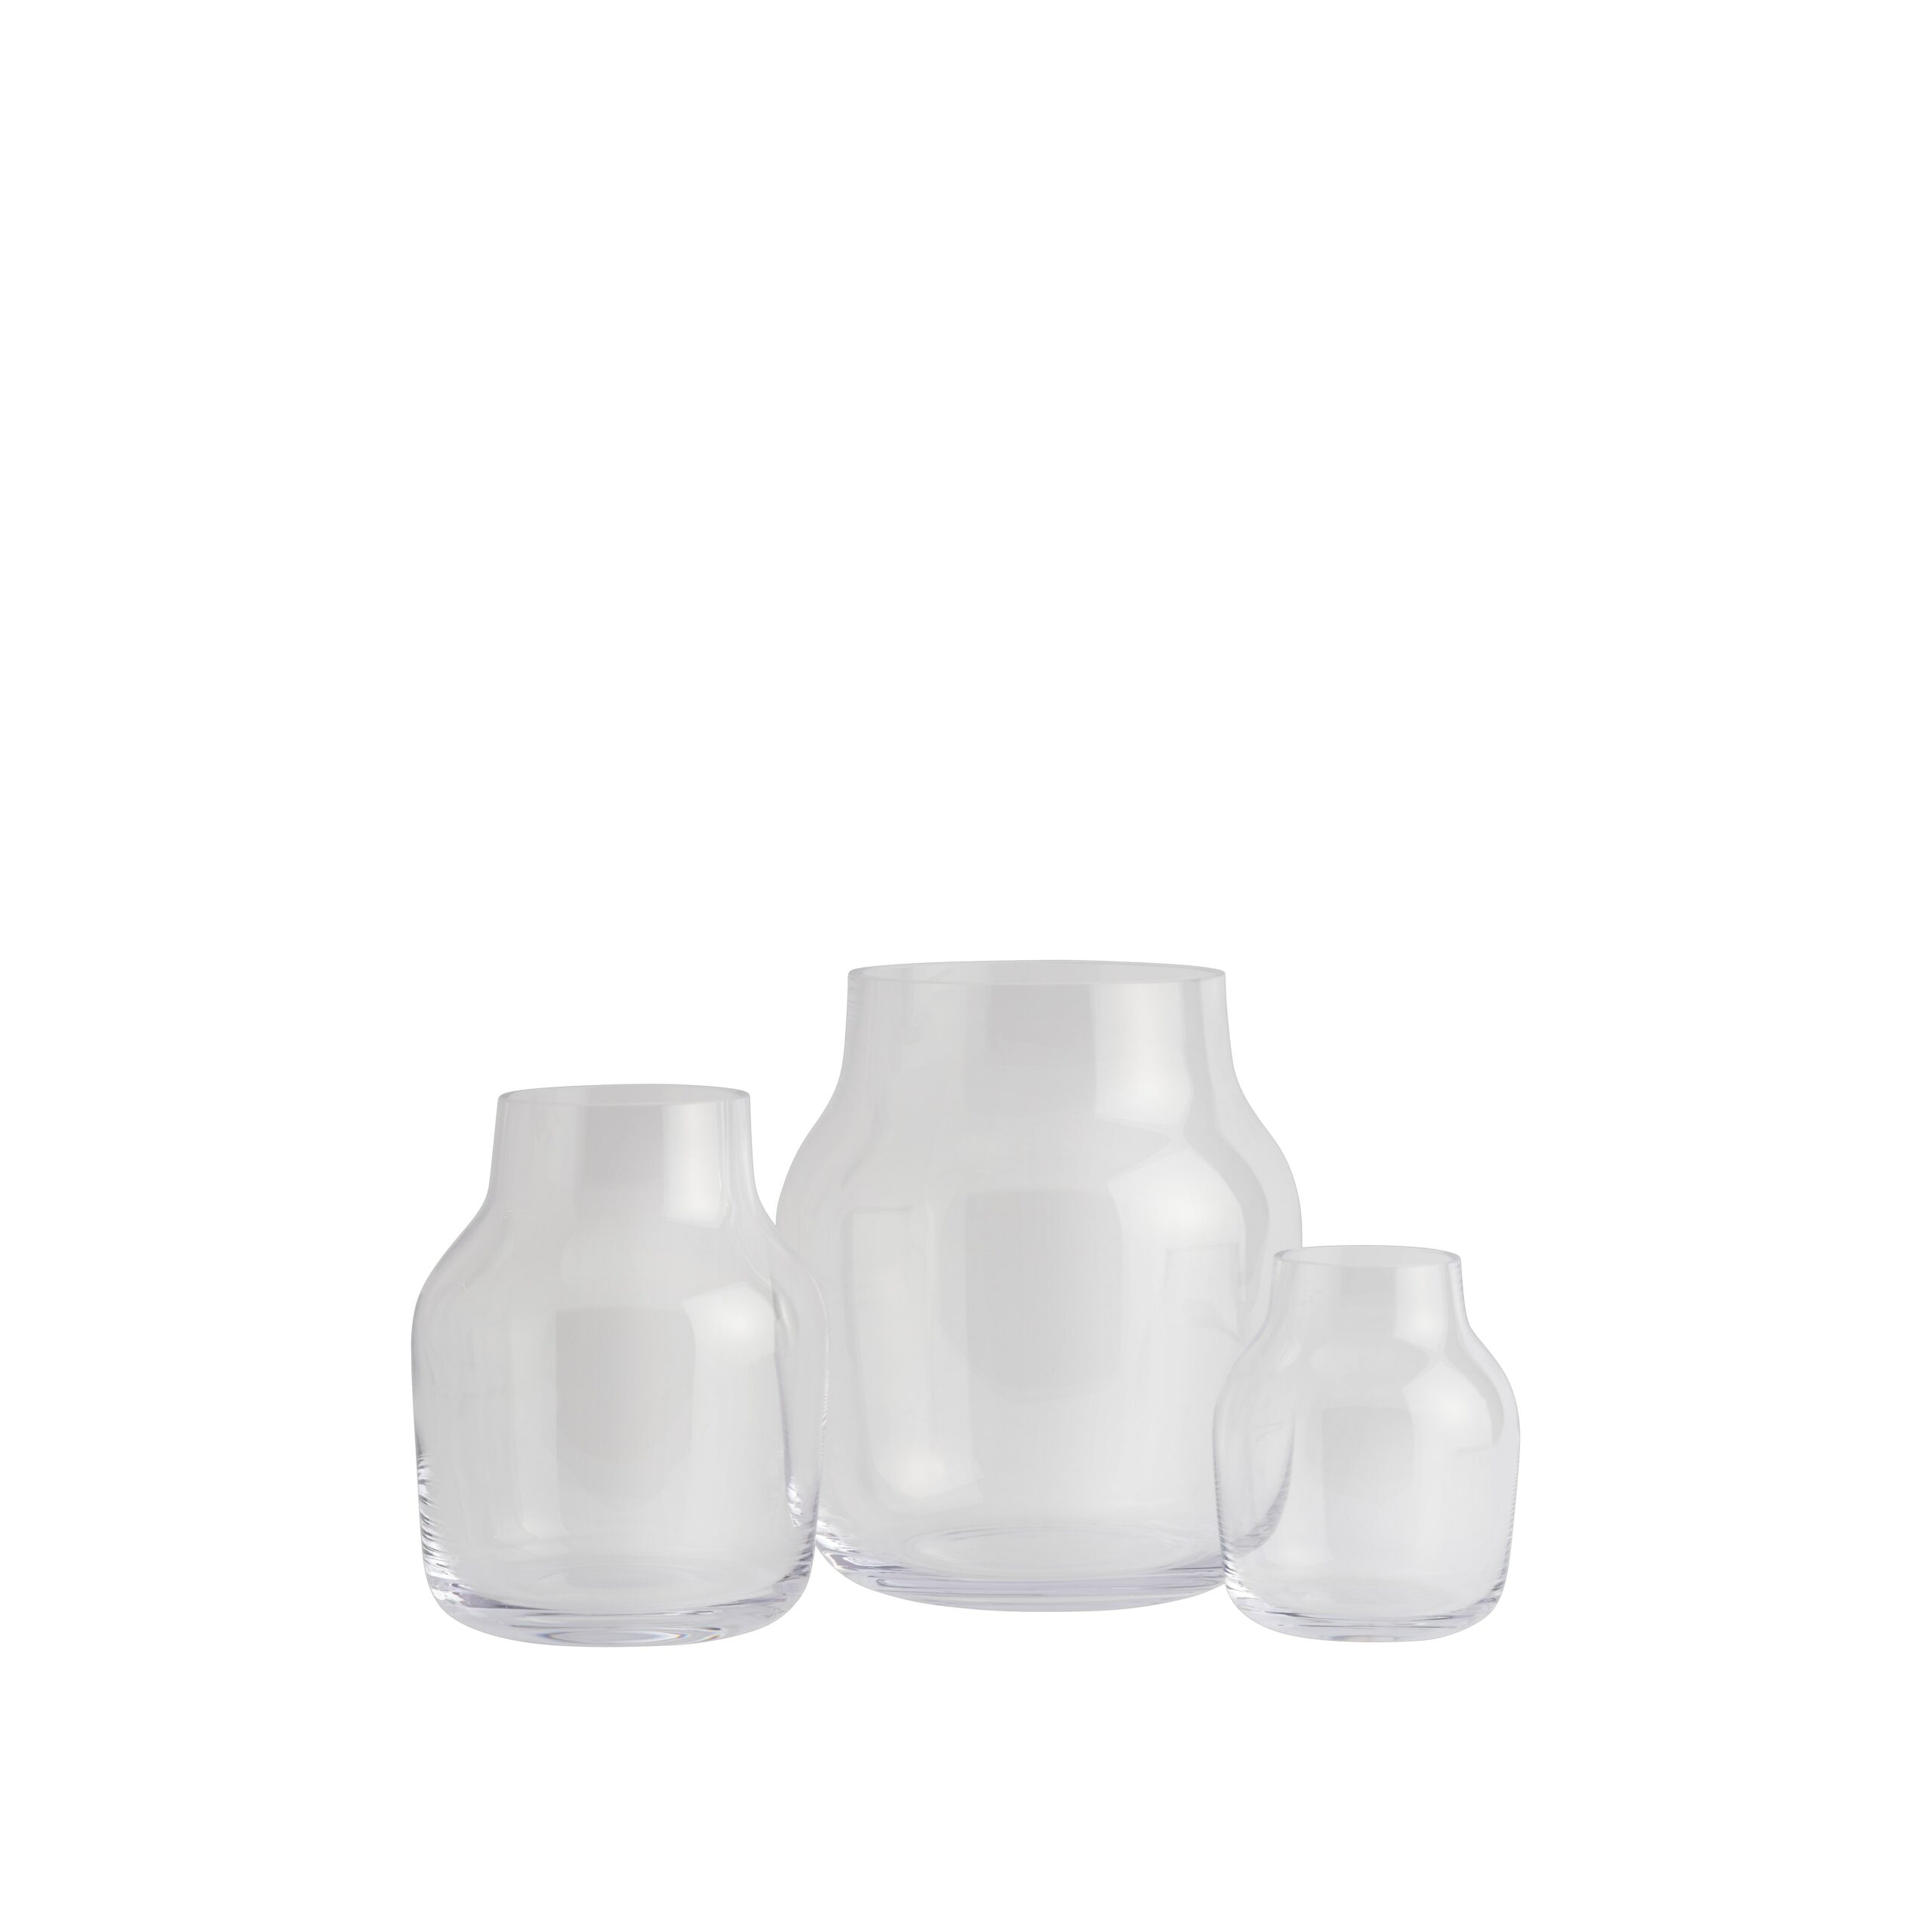 Silent-vase-family-clear-muuto-5000×5000-hi-res